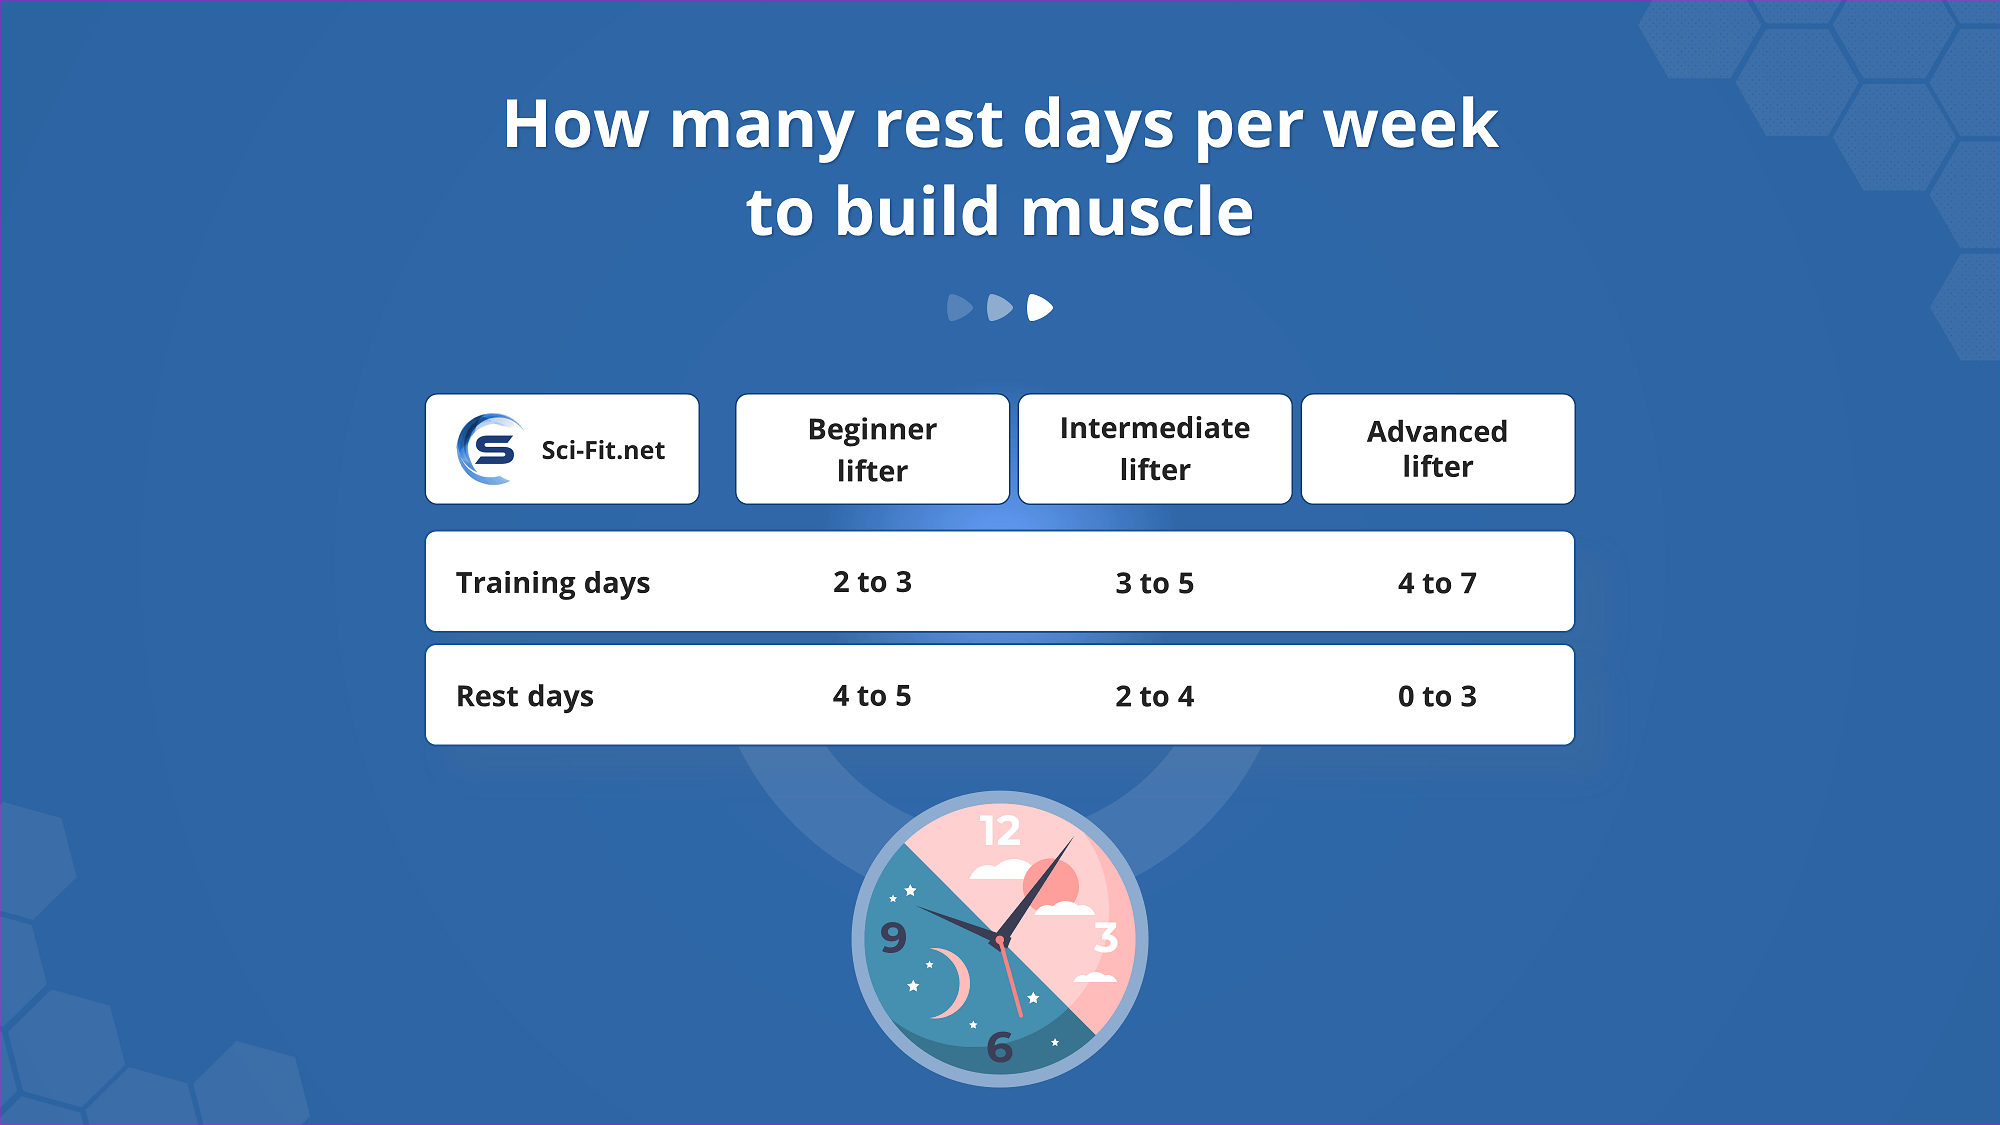 How many rest days per week to build muscle - infographic